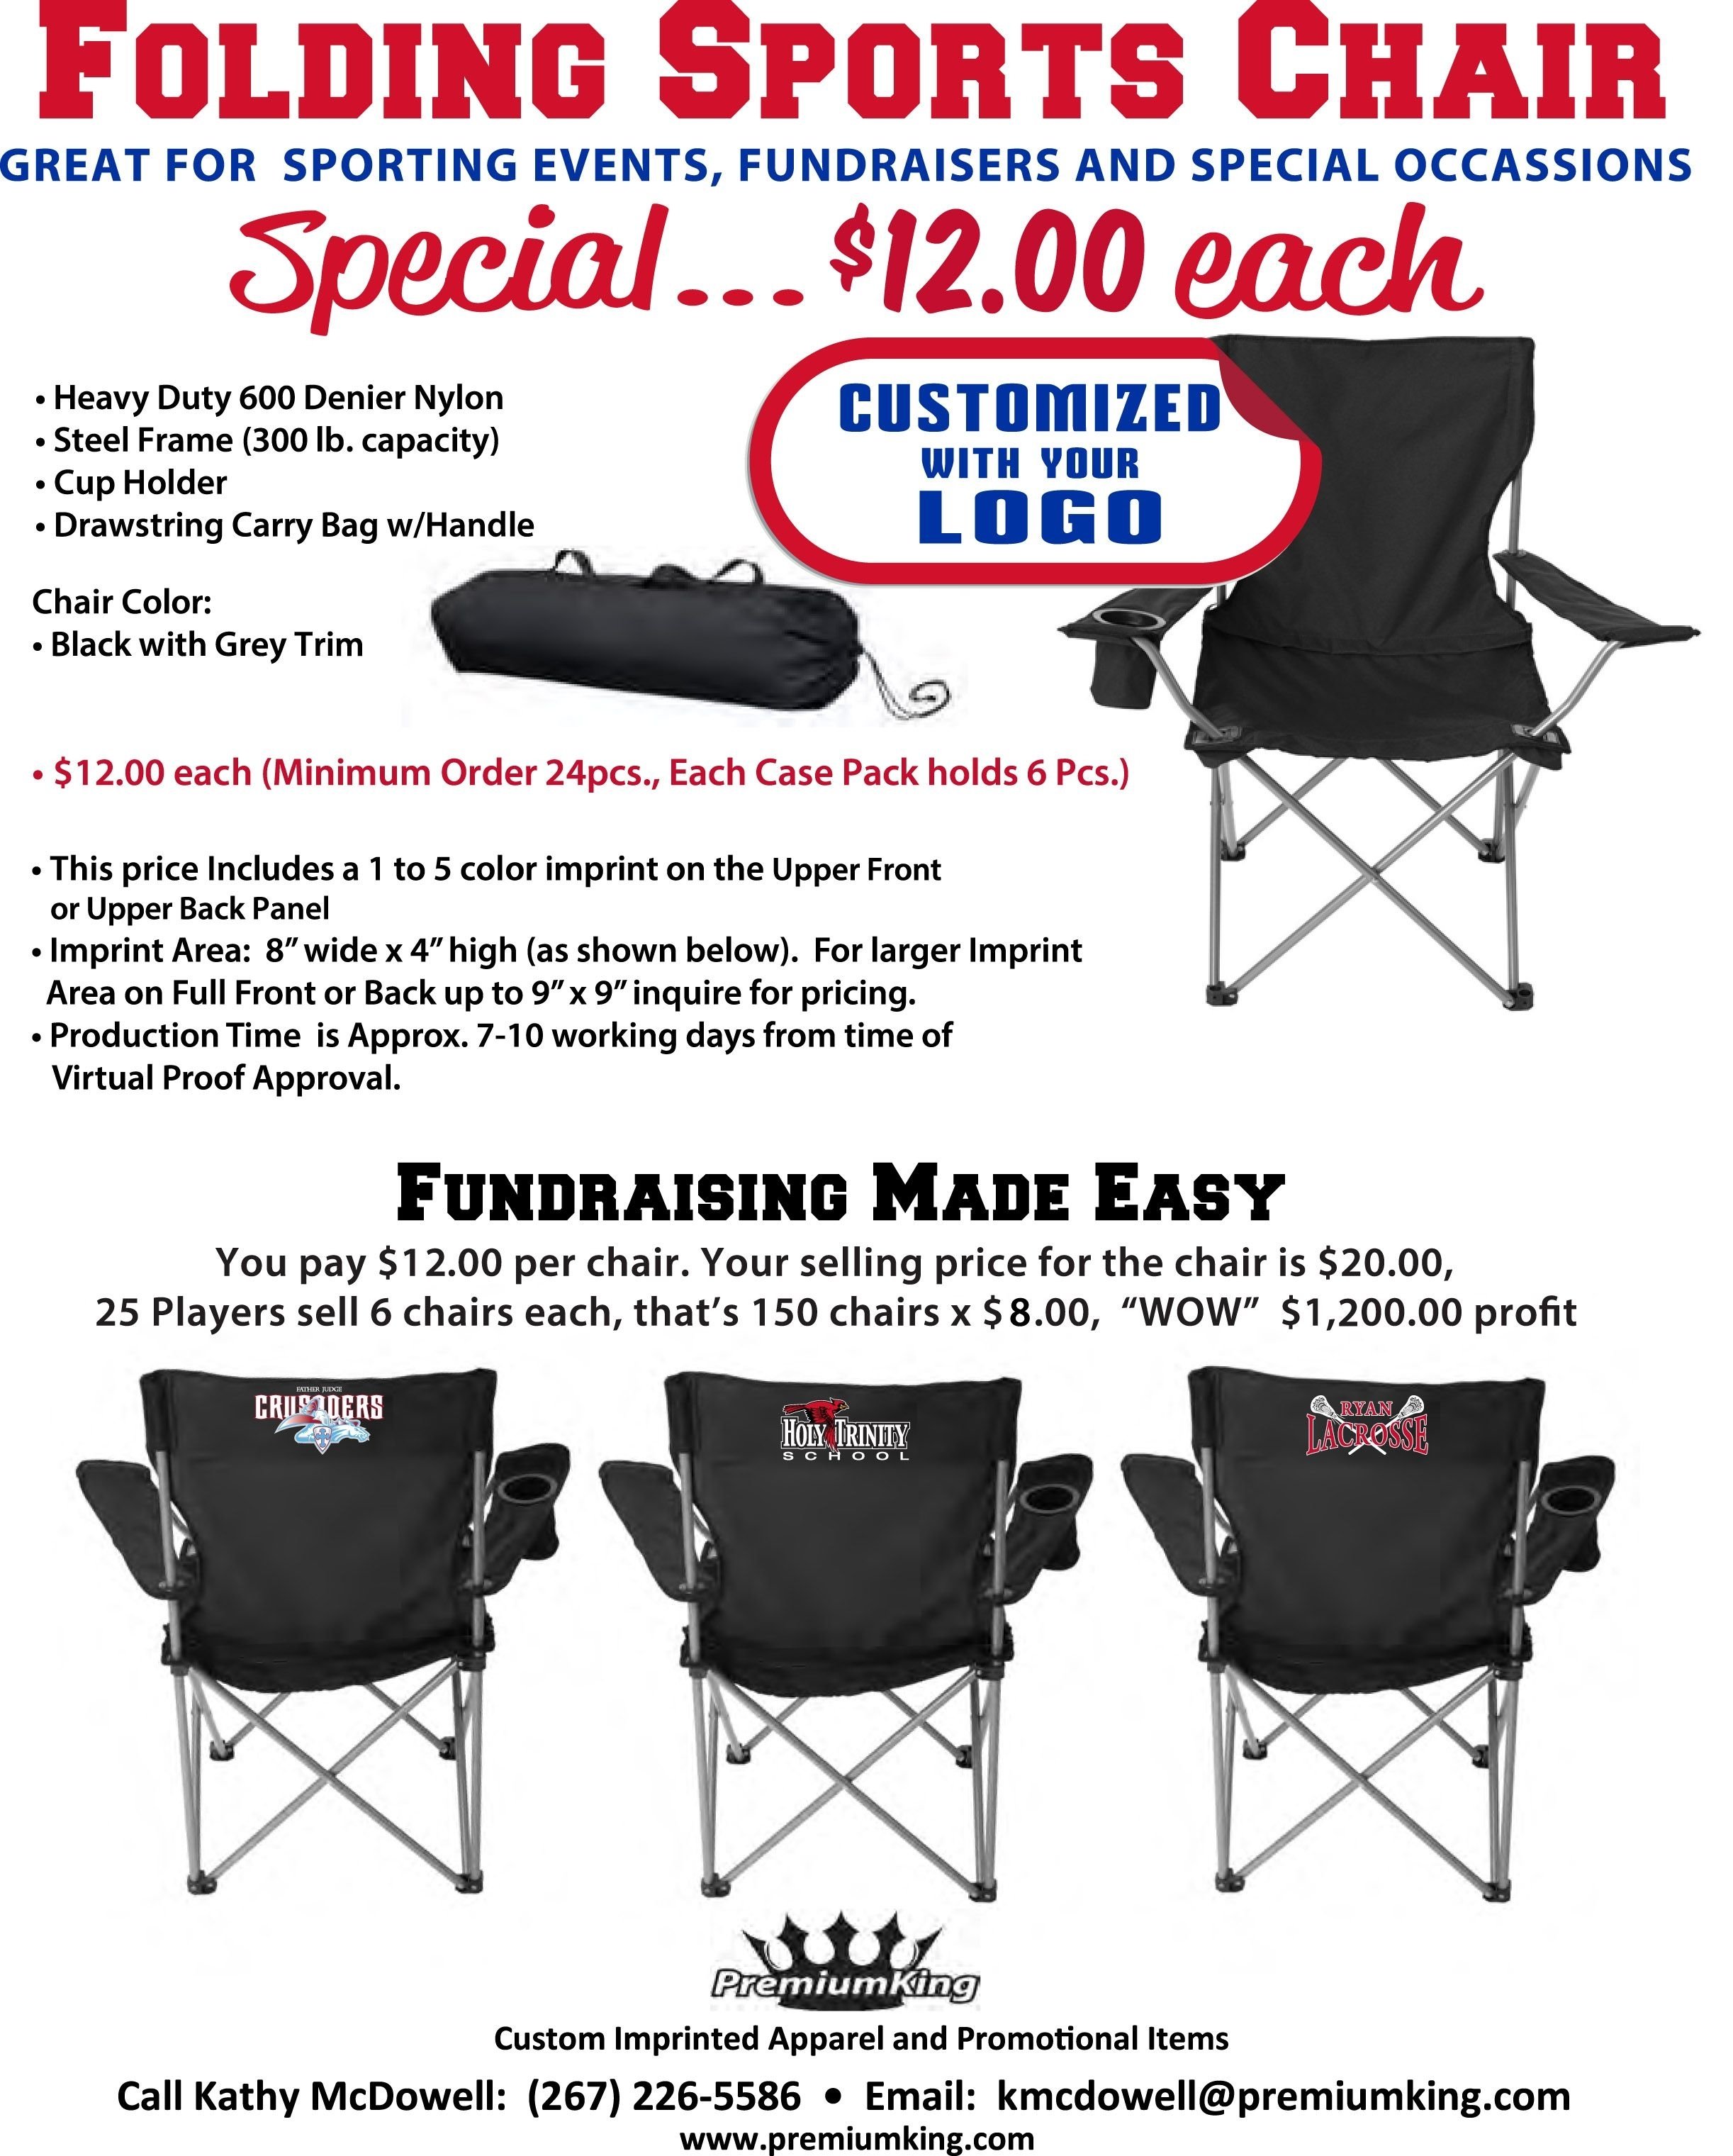 10 Attractive Fundraising Ideas For Softball Teams fundraiser idea folding sports chairs with team logo fundraising 3 2023